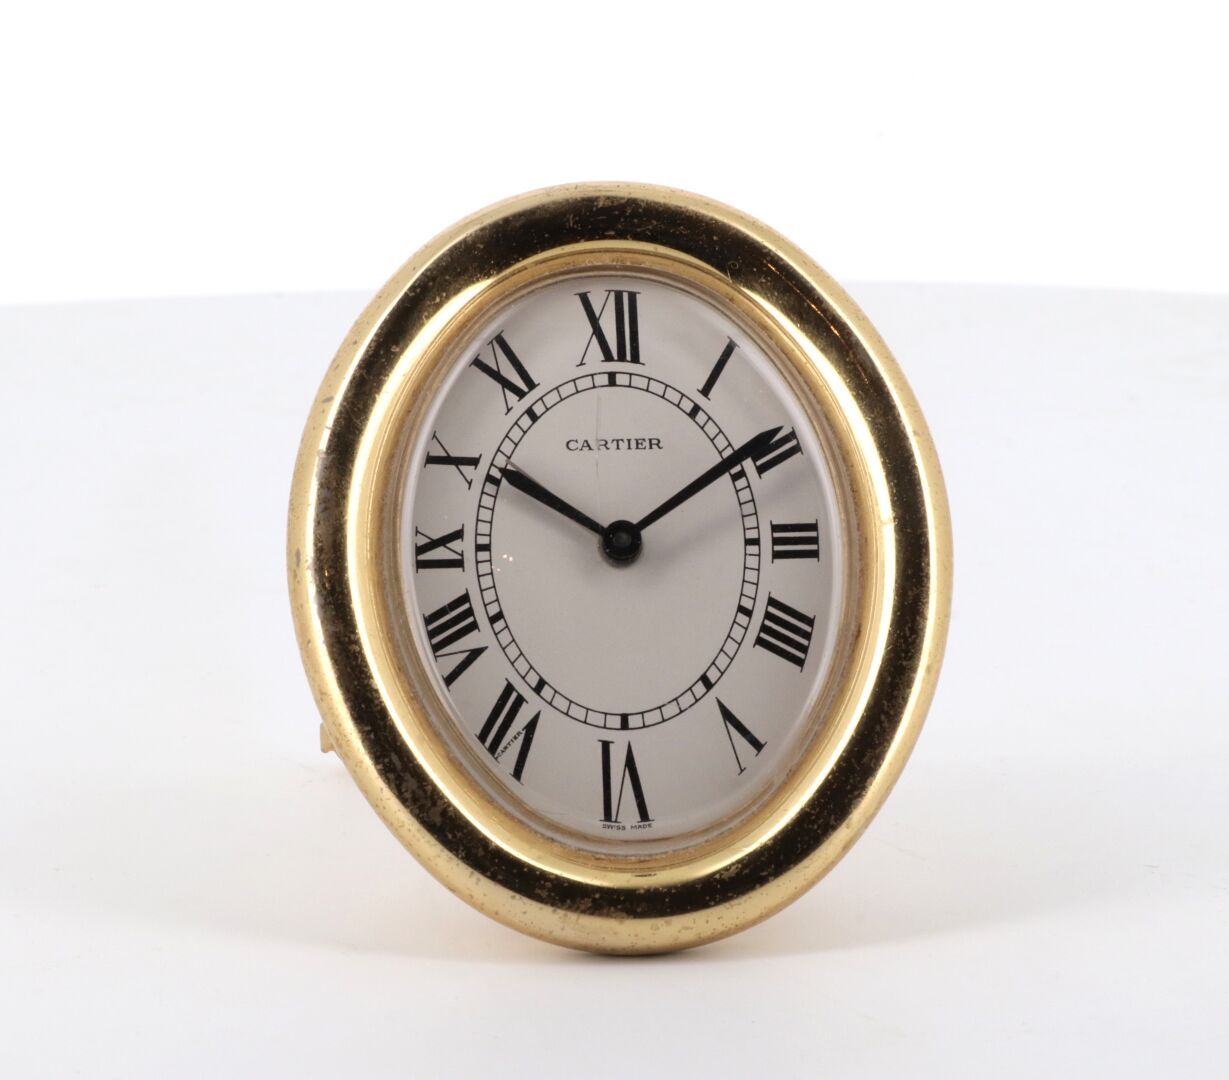 CARTIER, Baignoire Clocks "Bathtub" to be posed in plated metal, broad gilded be&hellip;